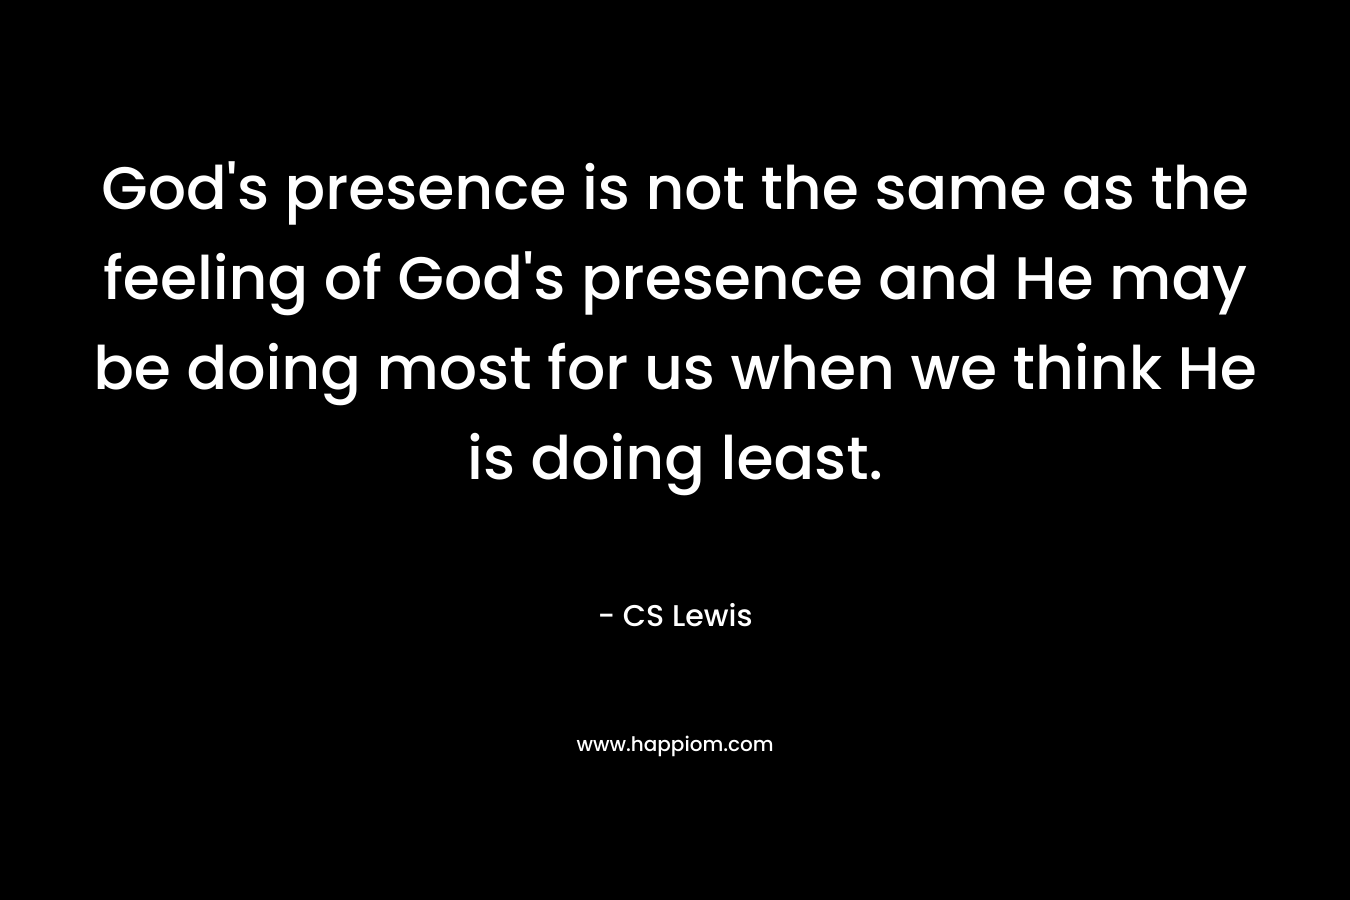 God's presence is not the same as the feeling of God's presence and He may be doing most for us when we think He is doing least.